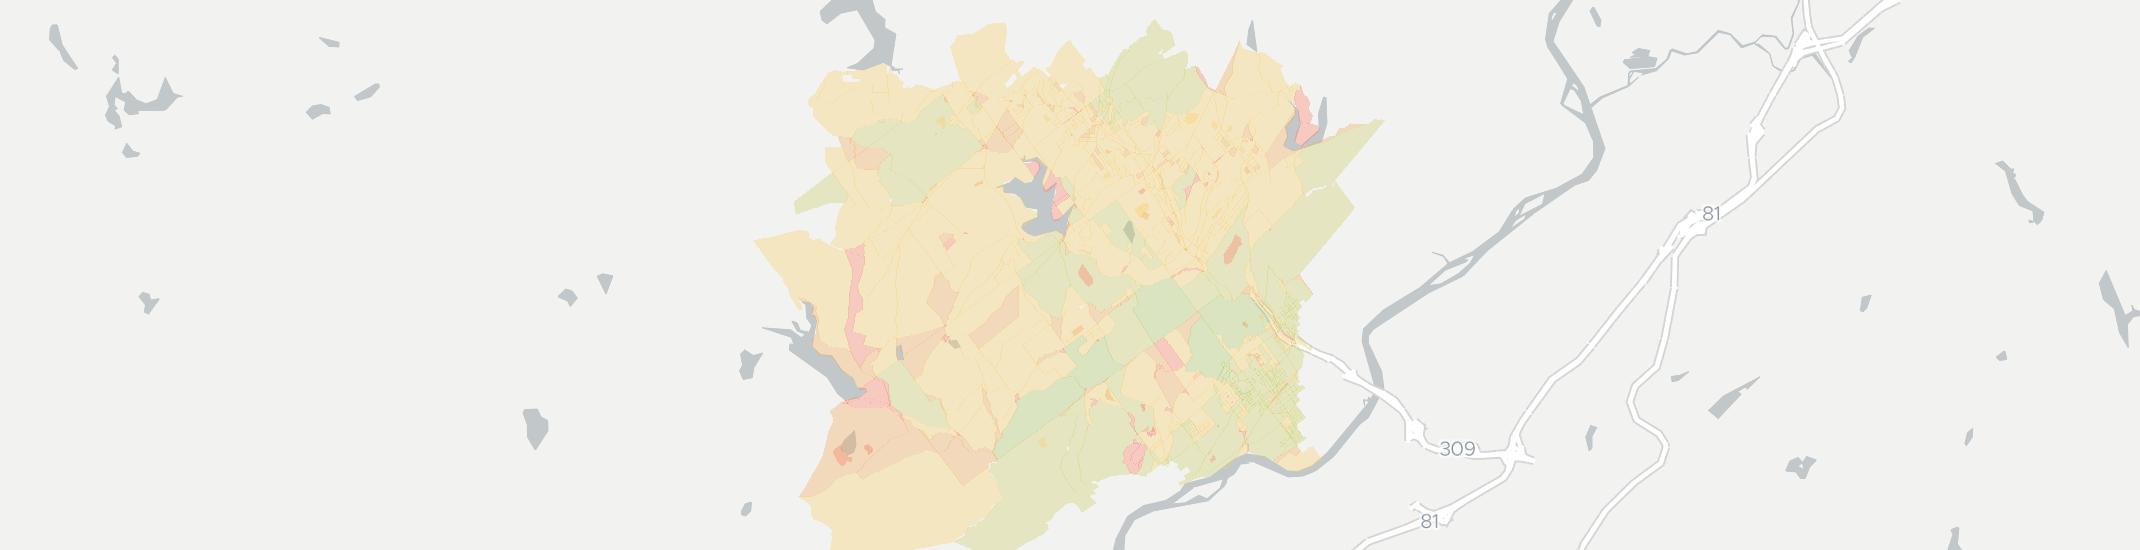 Shavertown Internet Competition Map. Click for interactive map.